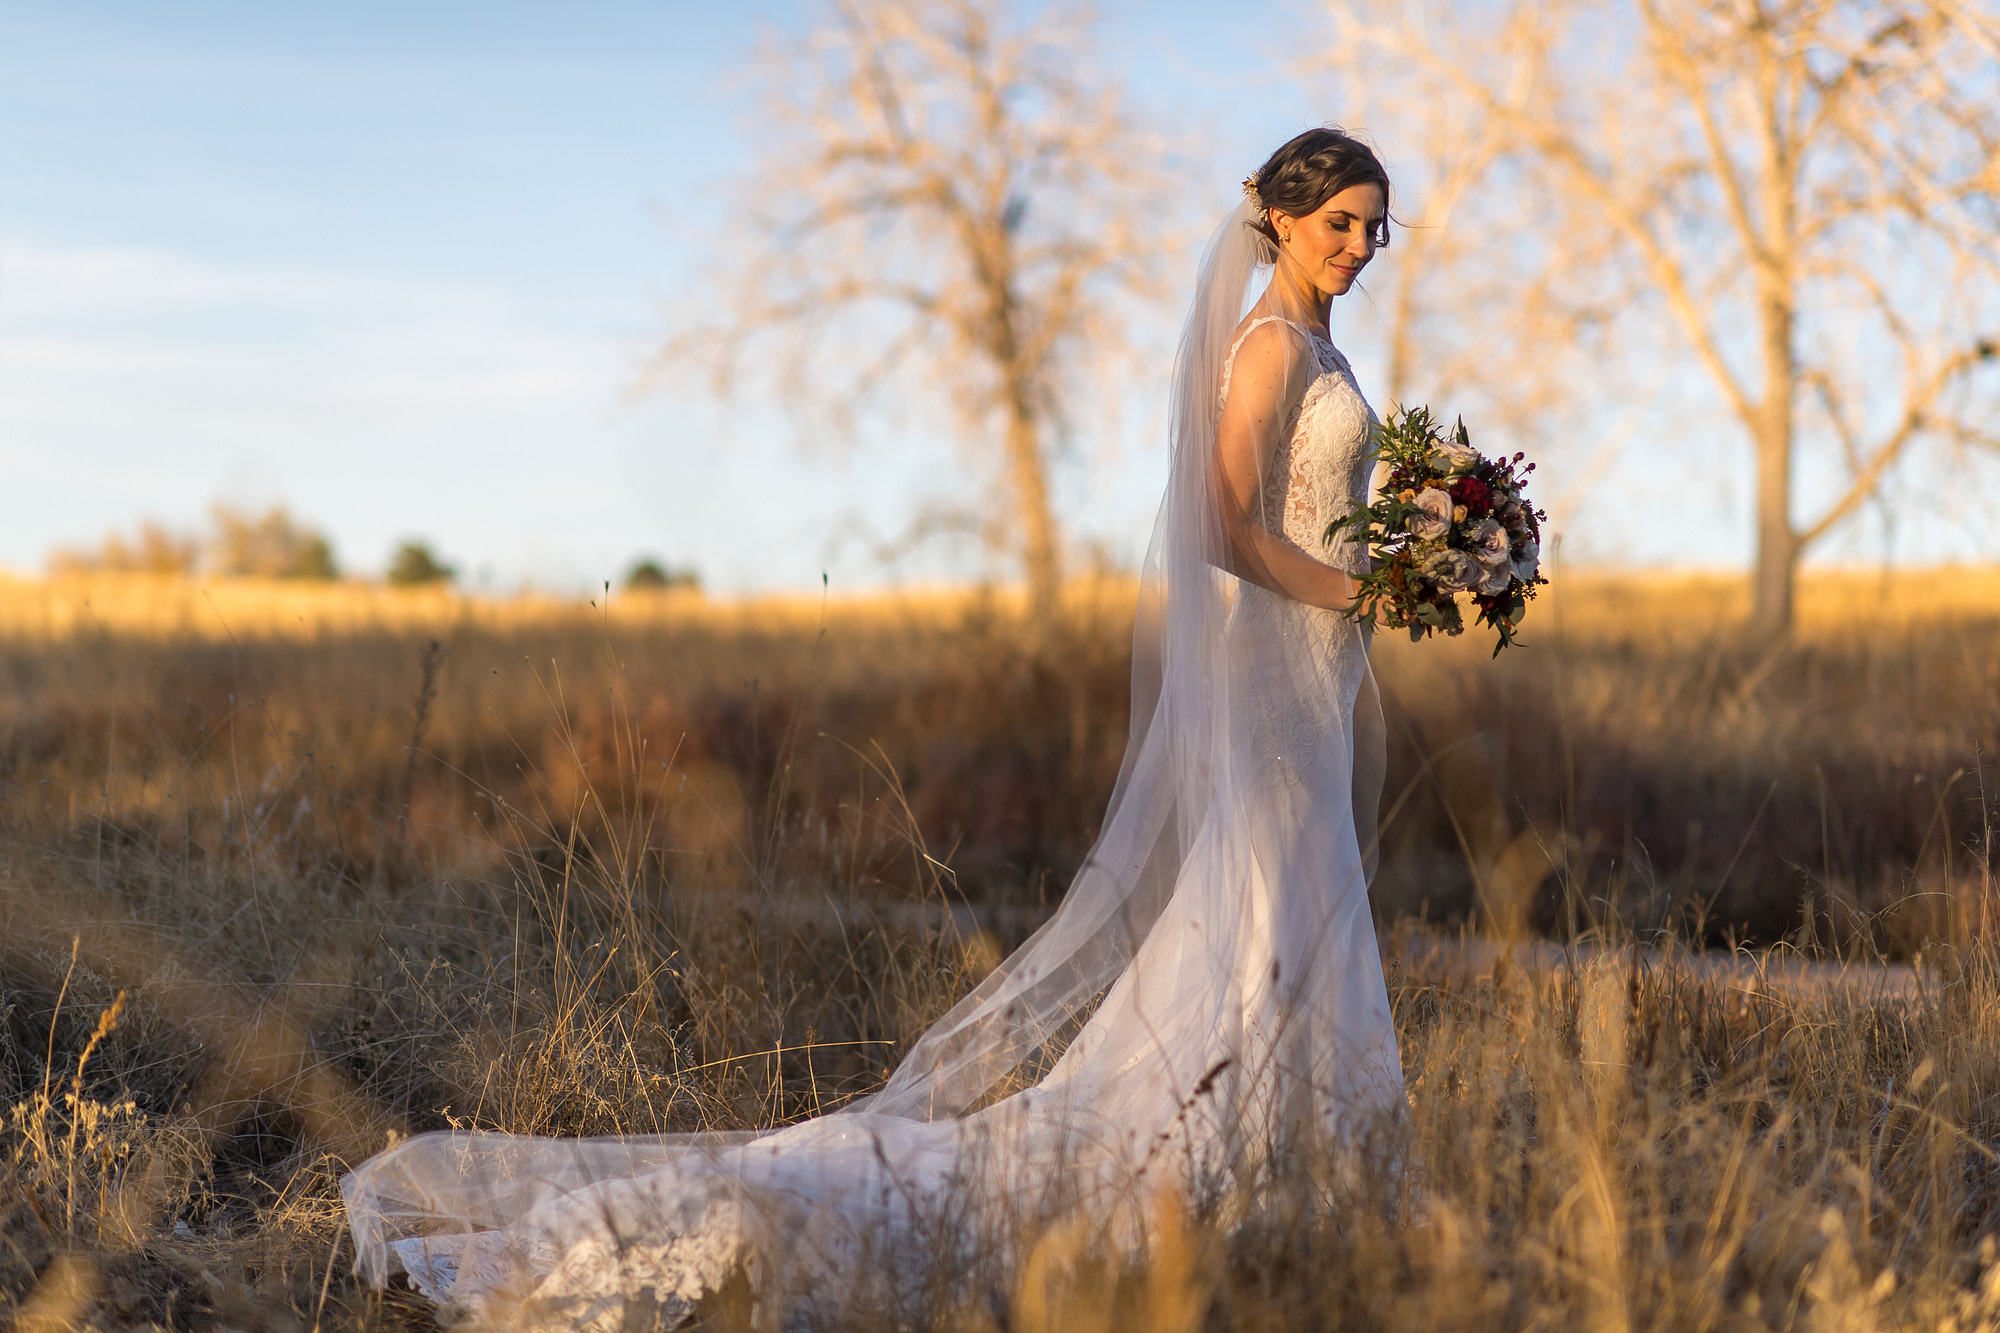 Bride poses for photos at Cherry Creek State Park in Aurora, Colorado.